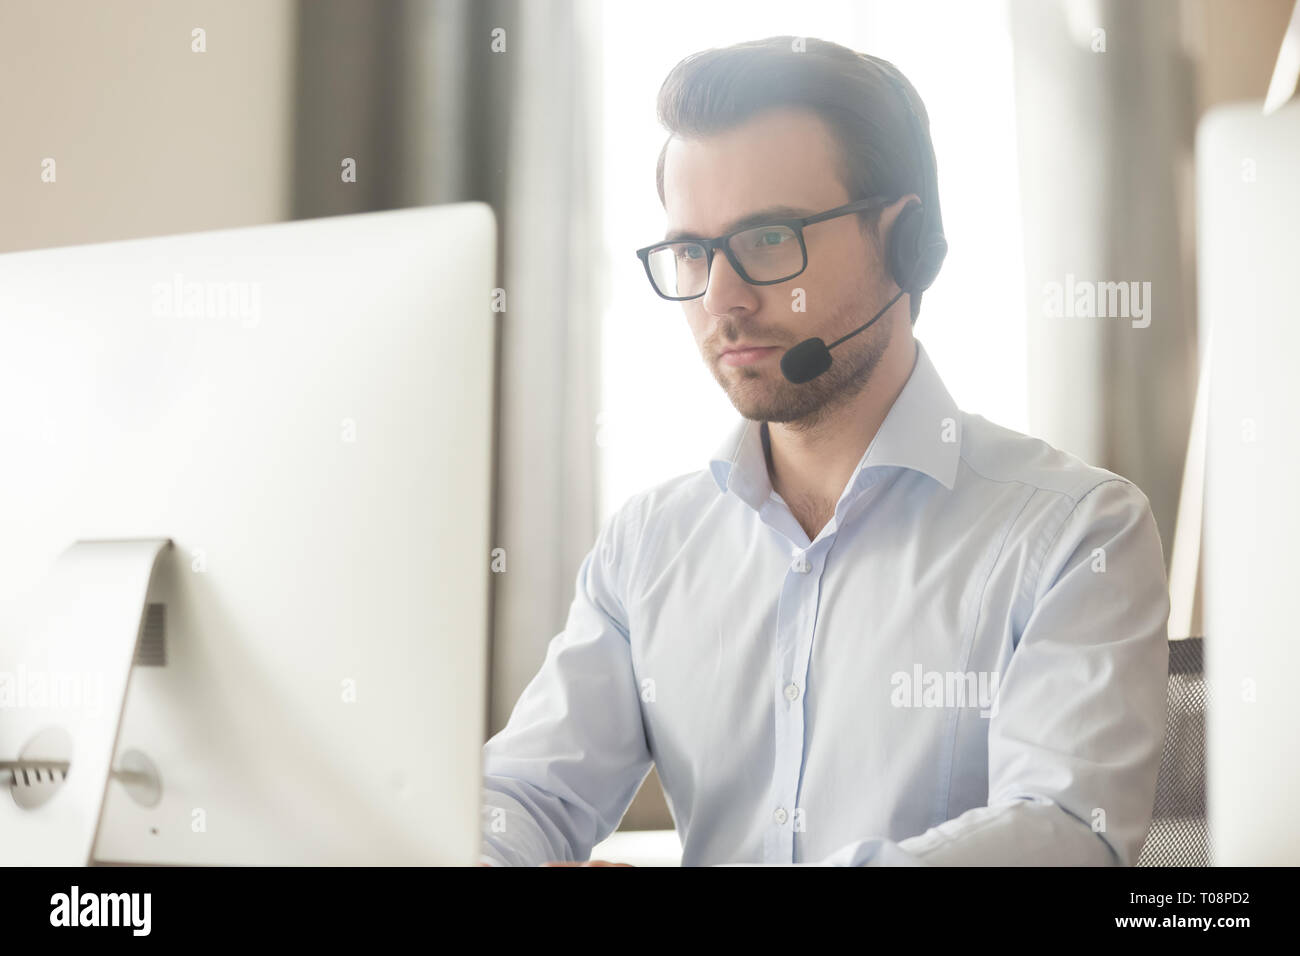 Serious businessman talking with headset on computer making conference call Stock Photo